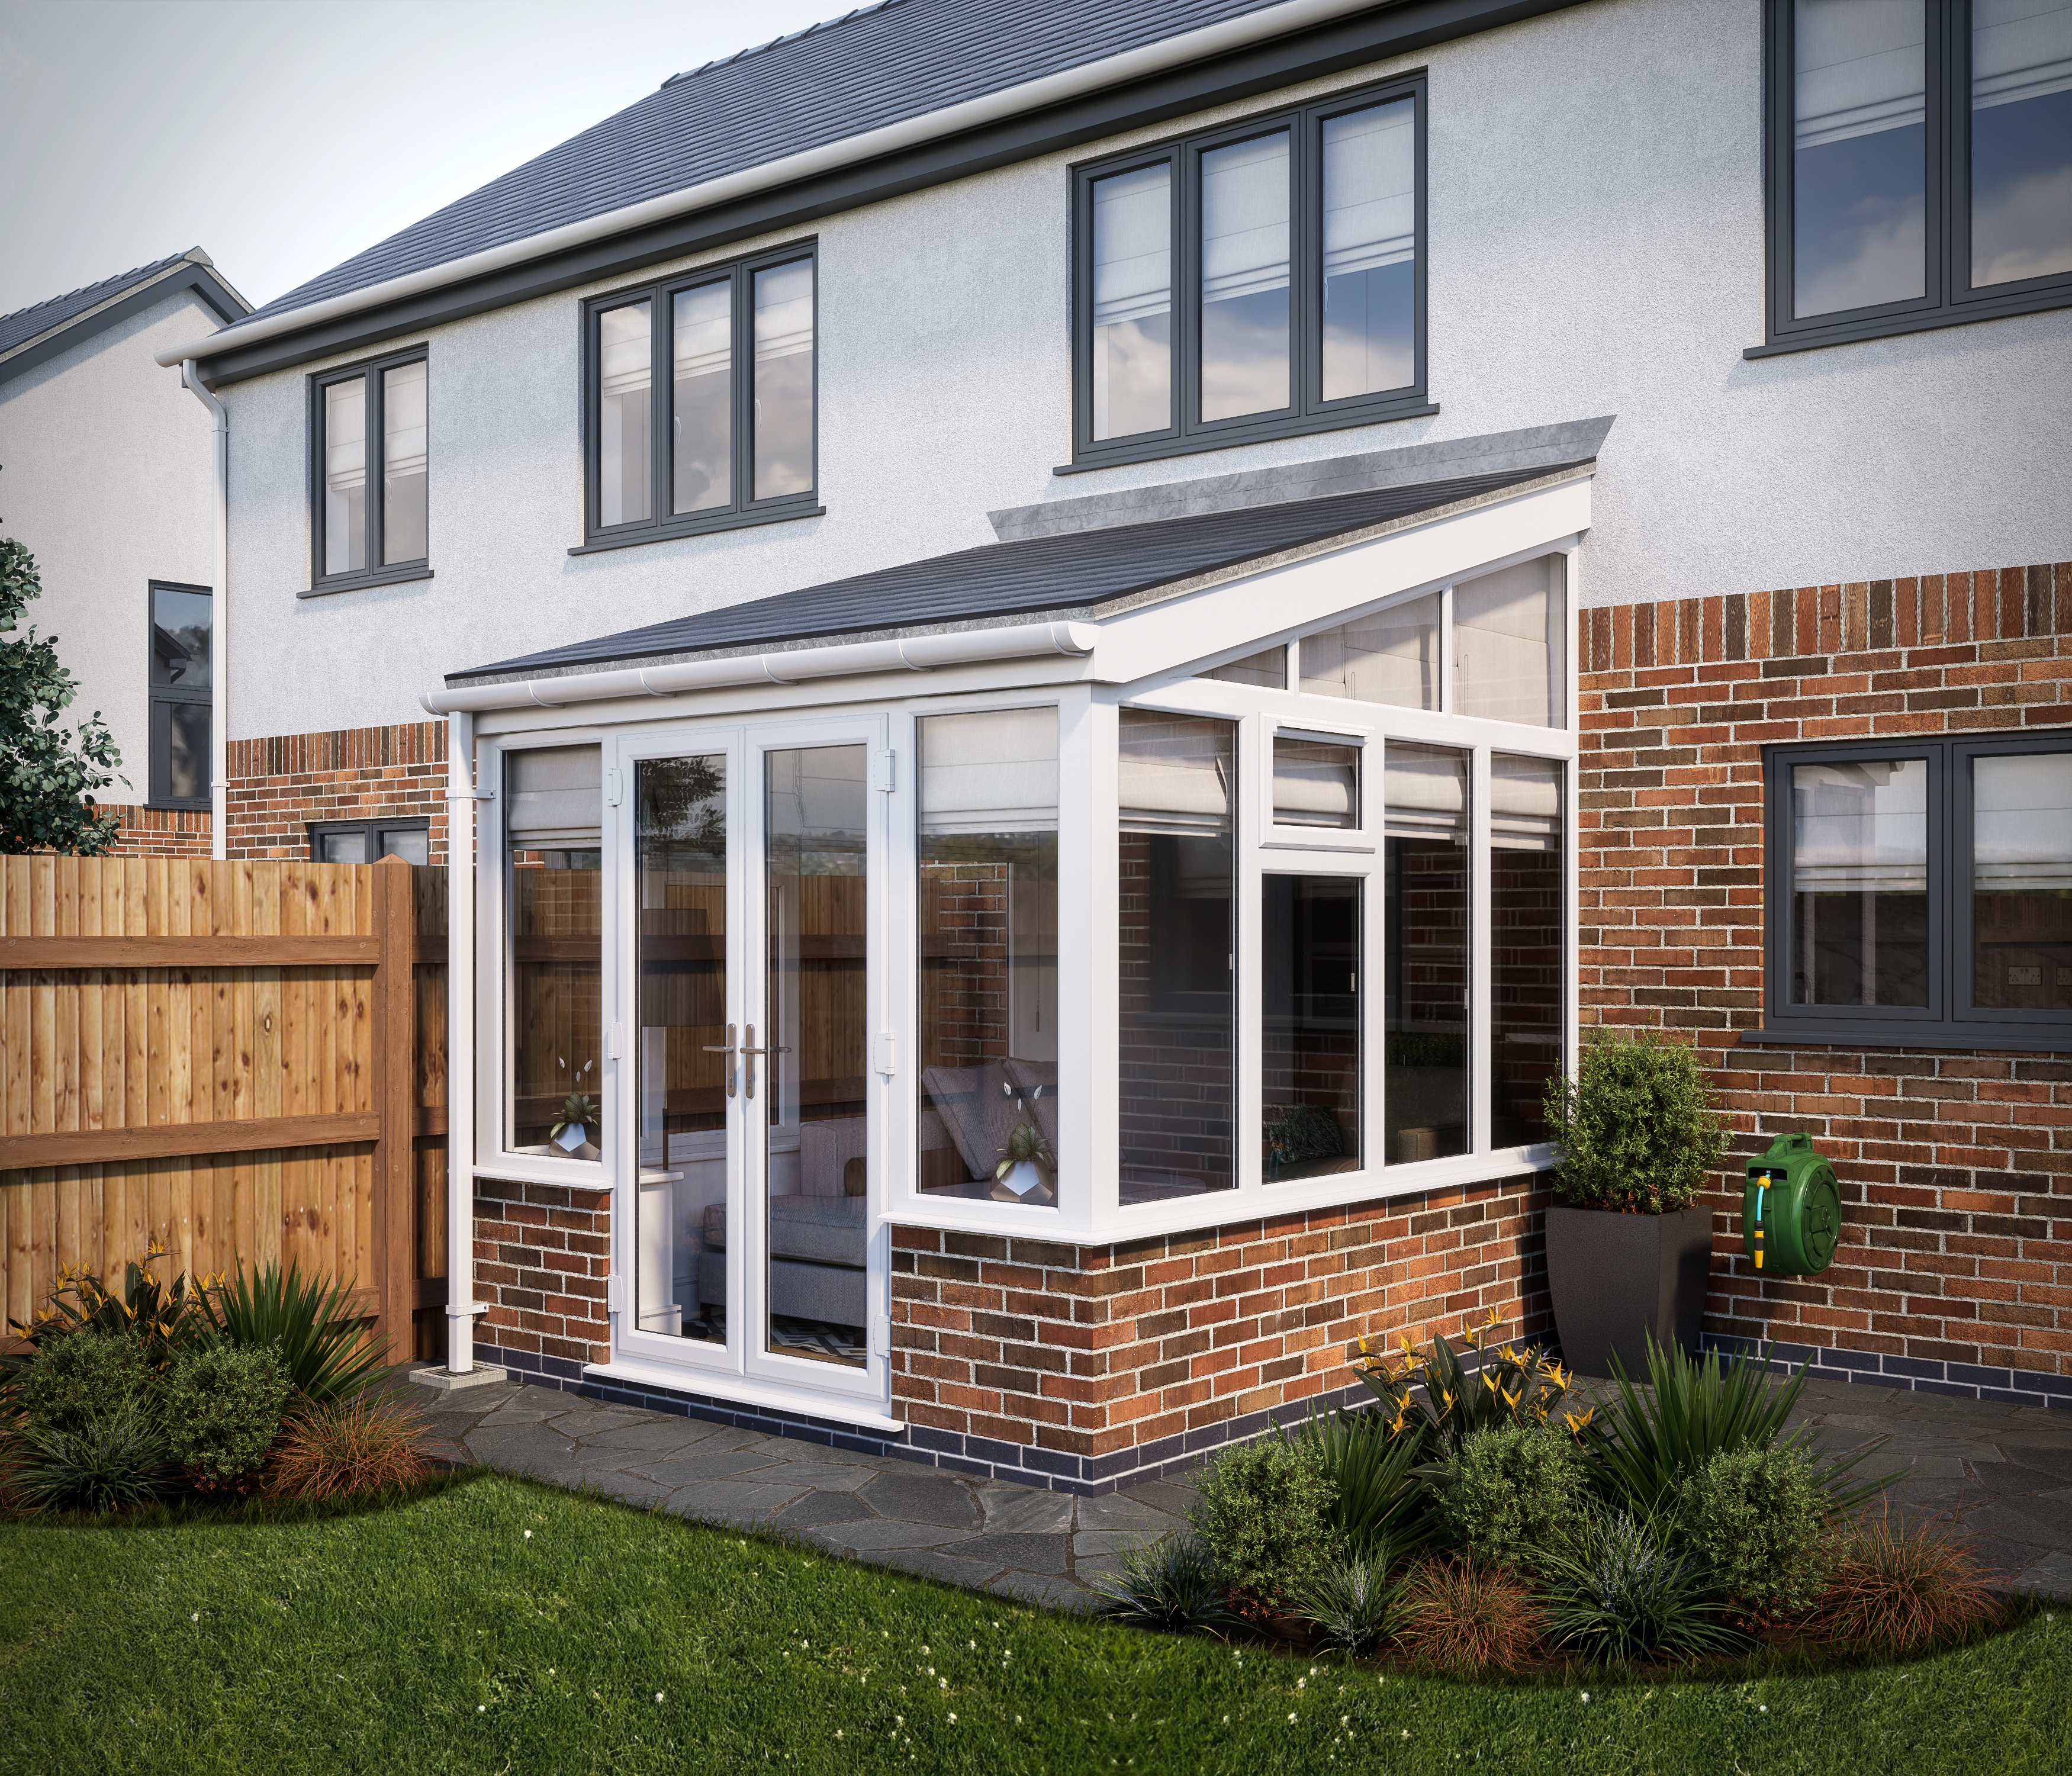 Image of SOLid Roof Lean to Conservatory White Frames Dwarf Wall with Titanium Grey Tiles - 10 x 10ft